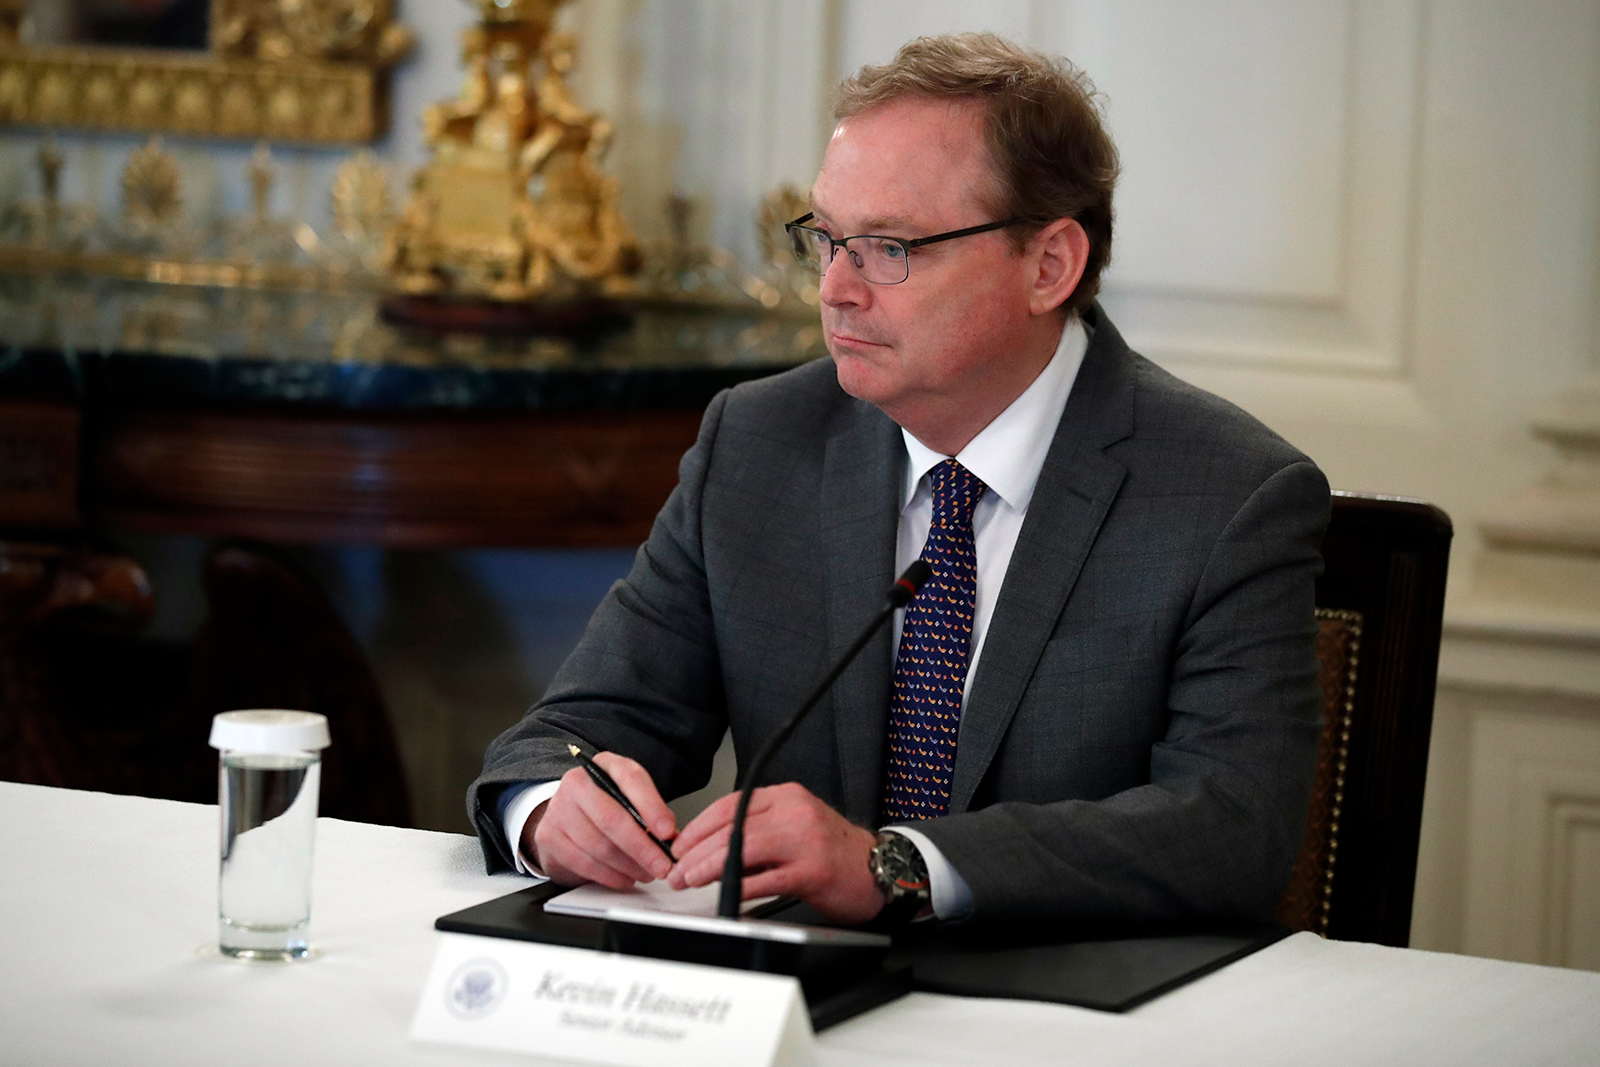 Kevin Hassett, senior economic adviser to President Donald Trump, listens during a roundtable at the White House on April 29.